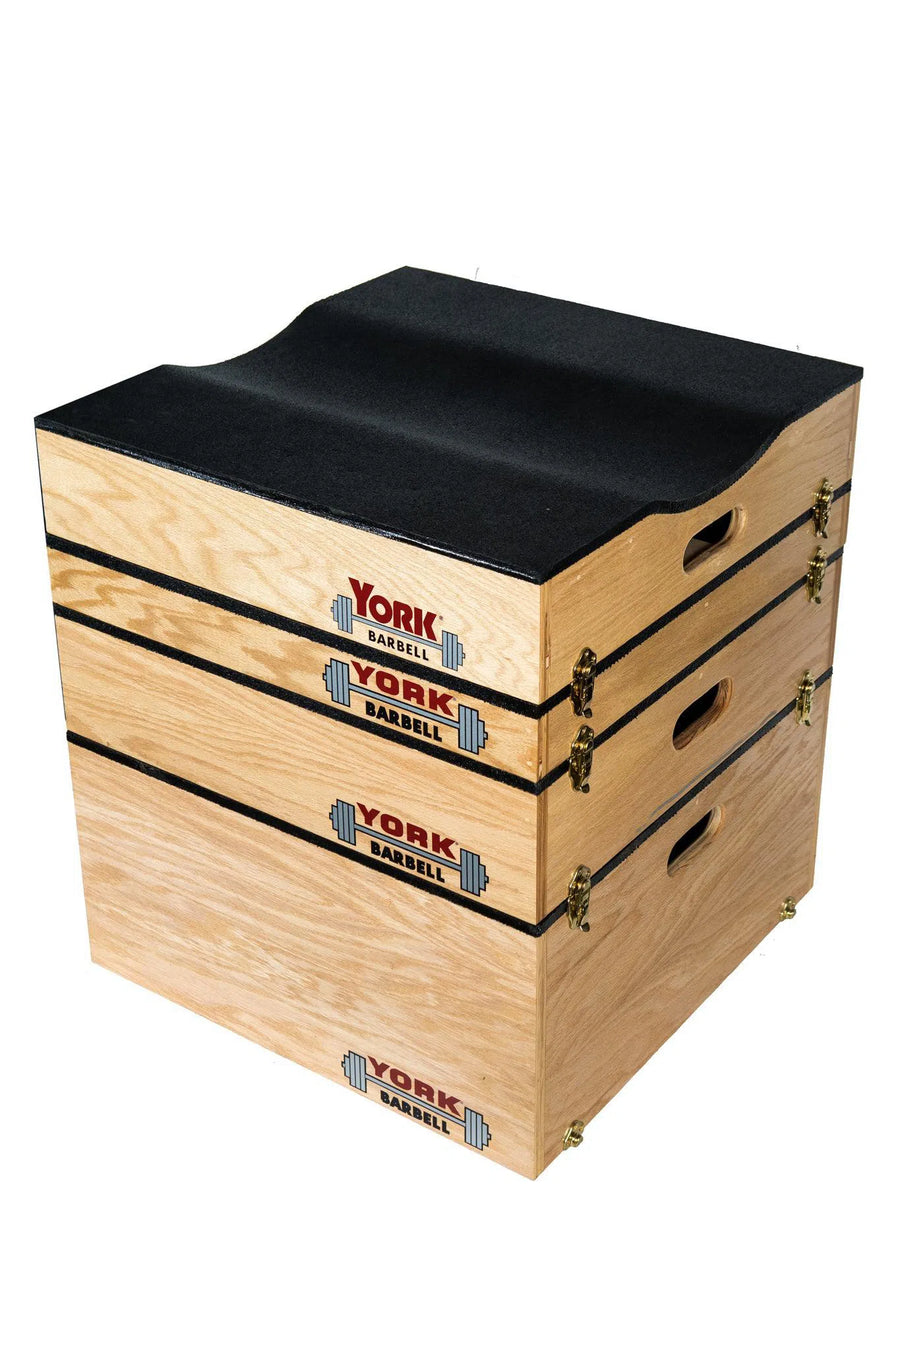 York Barbell Stackable Plyo Step-Up Box 54256-54258 High-Intensity Muscle Training Healthy and Safe Workout